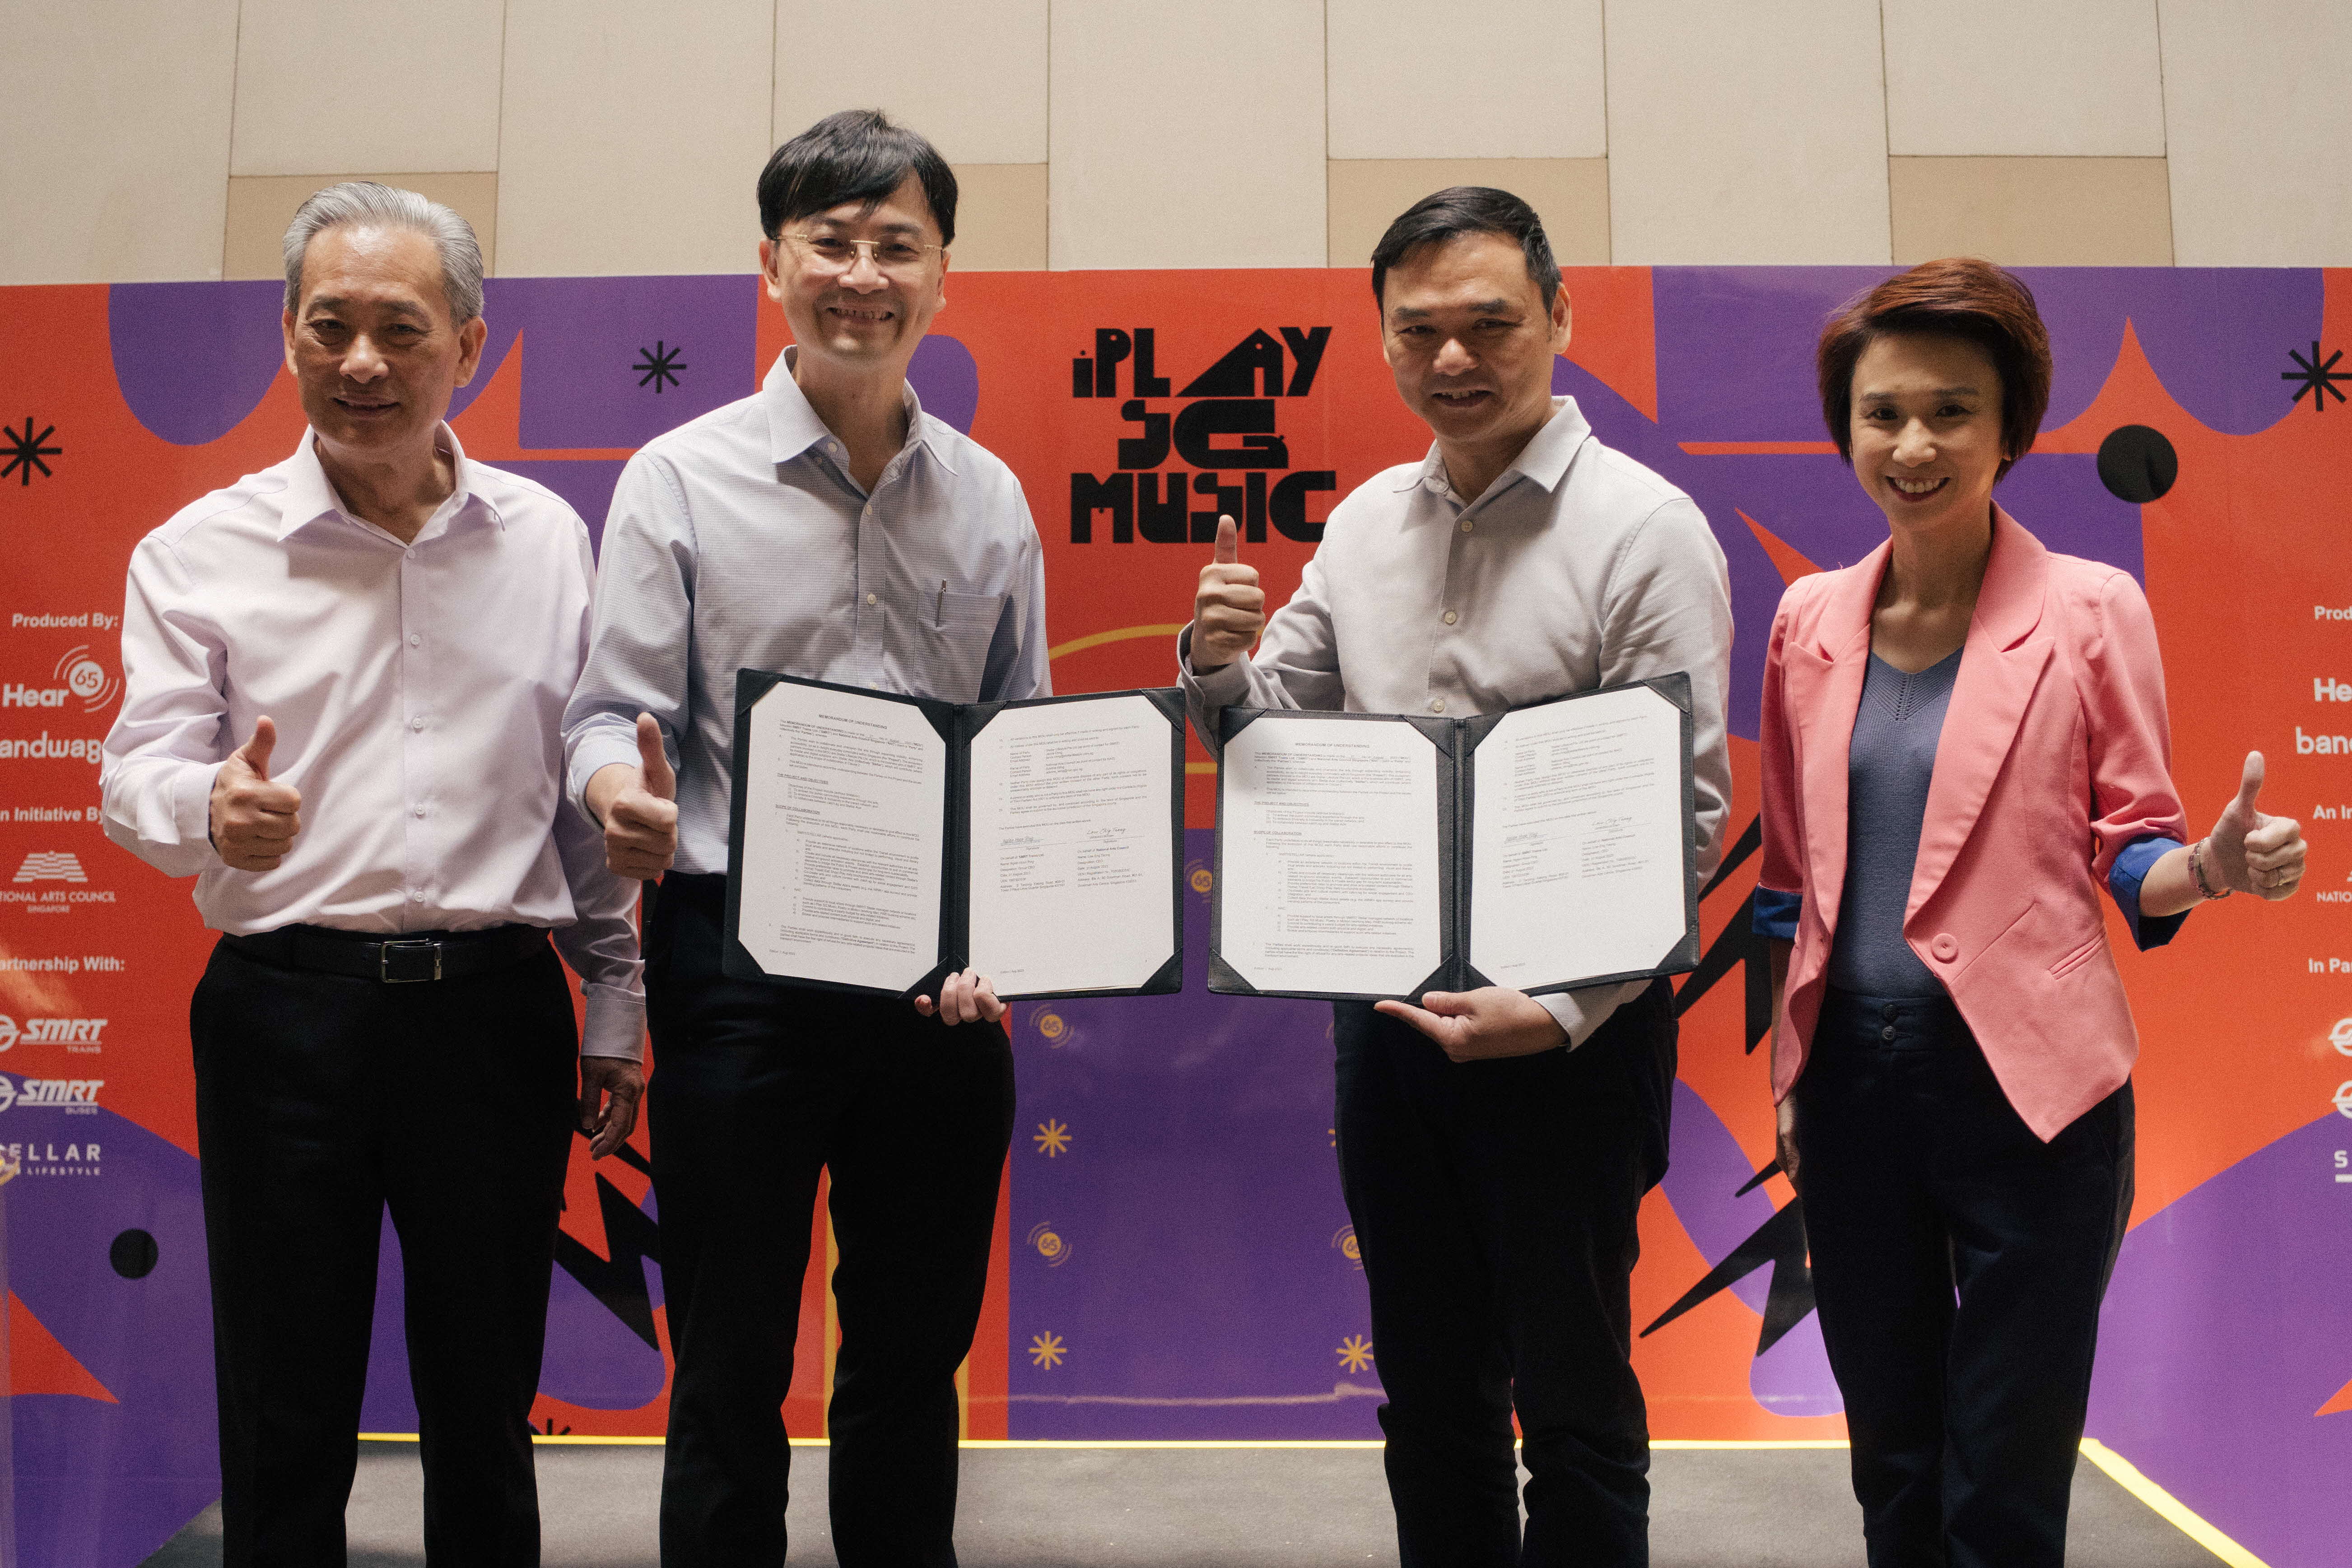 The National Arts Council (NAC) and SMRT Trains Ltd. signed a three-year Memorandum of Understanding (MoU) to enliven spaces of commute through music, poetry, and busking, to widen avenues of exposure to Singapore’s art in public spaces